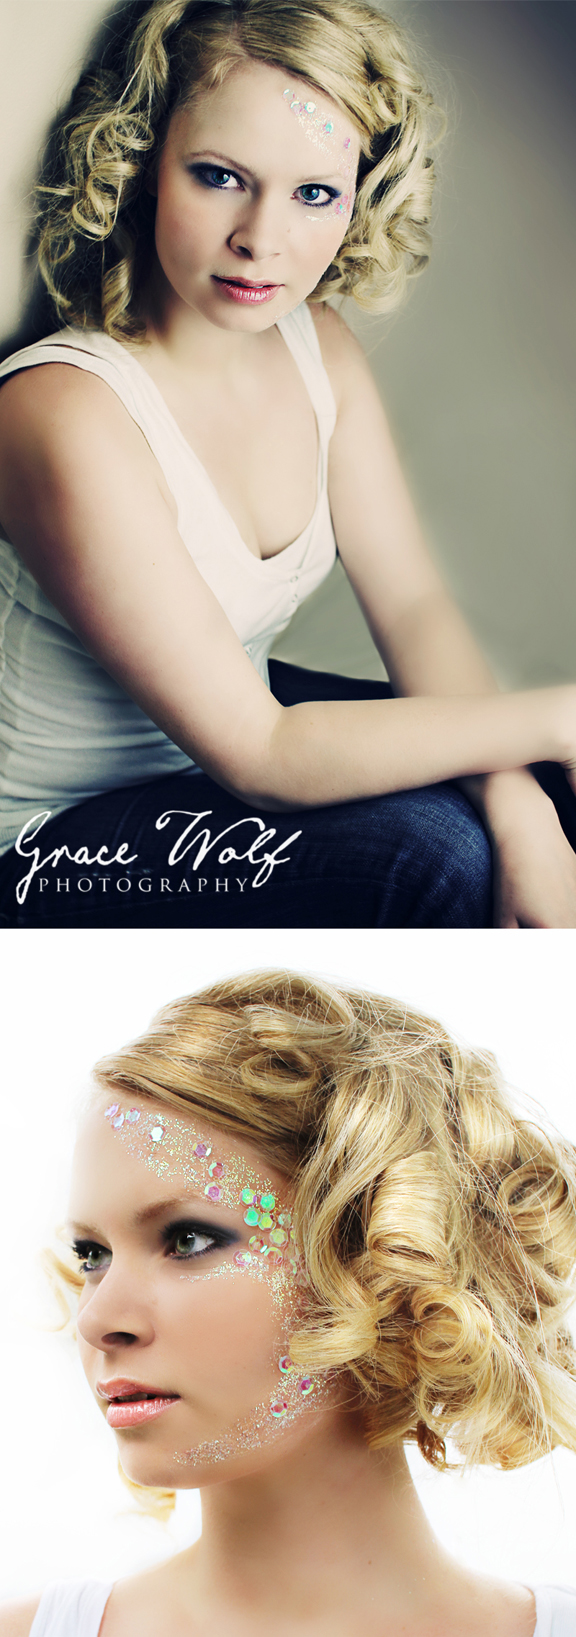 Female model photo shoot of Grace Wolf Photography in Petersburg, AK